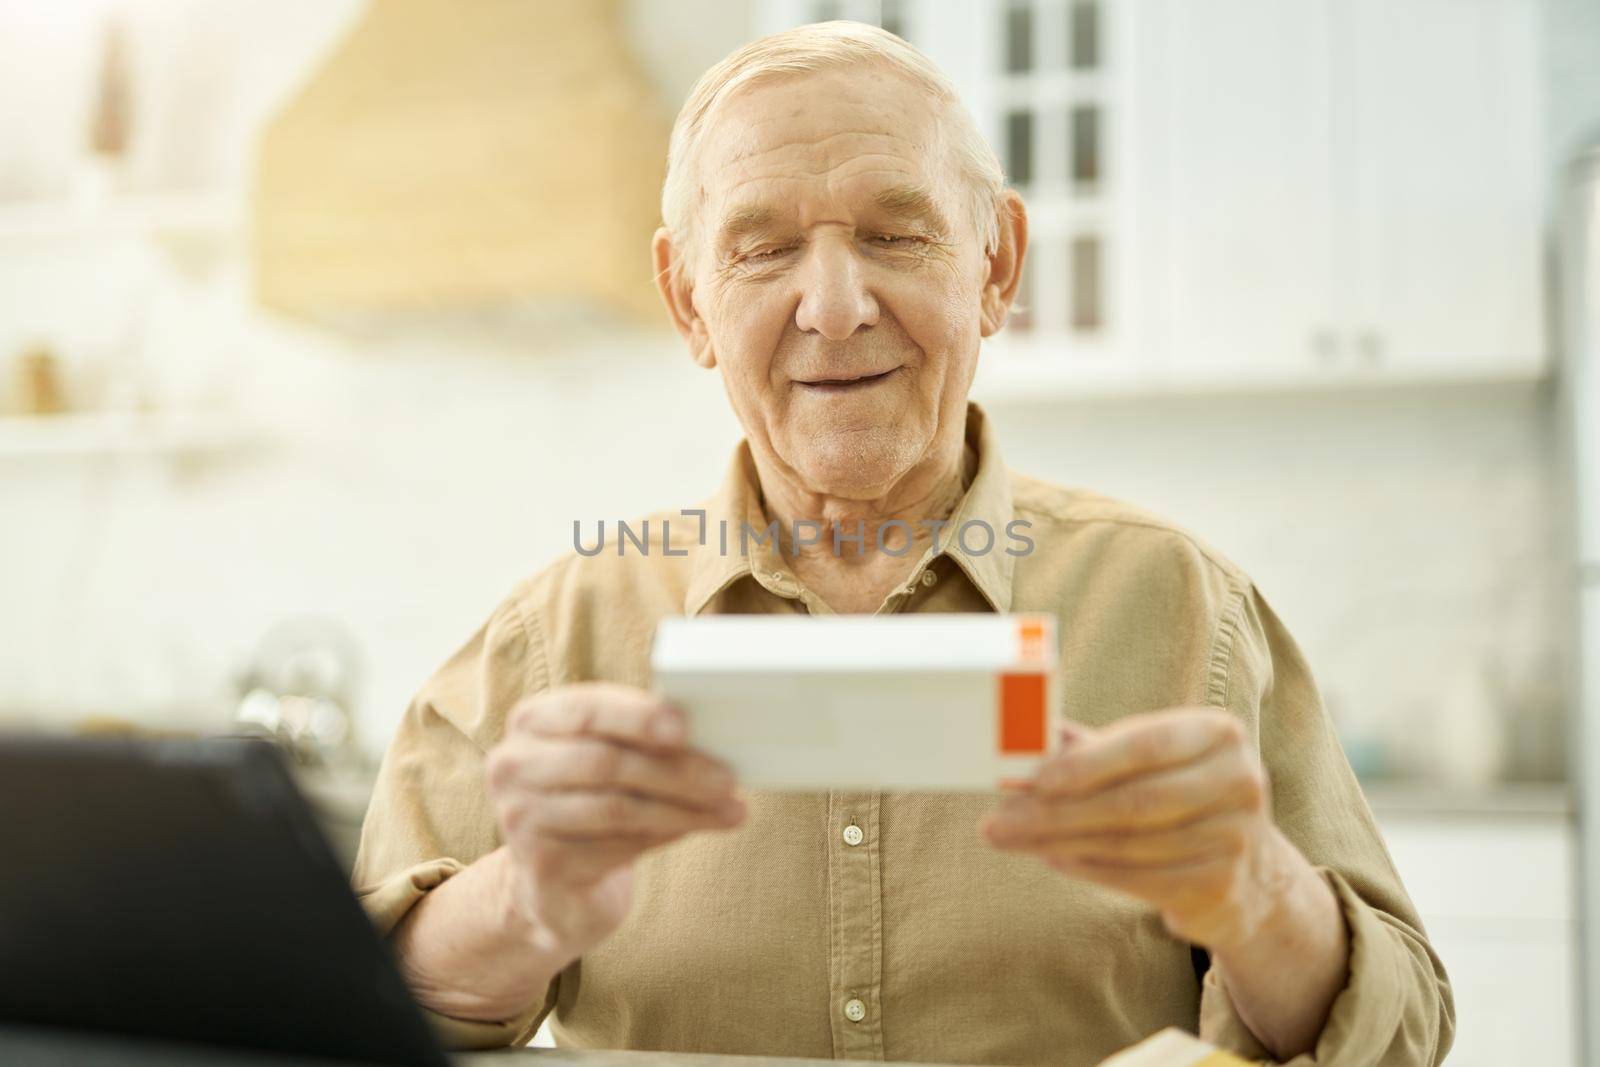 Calm senior citizen holding and looking at the tiny box of medication while sitting at the table at home